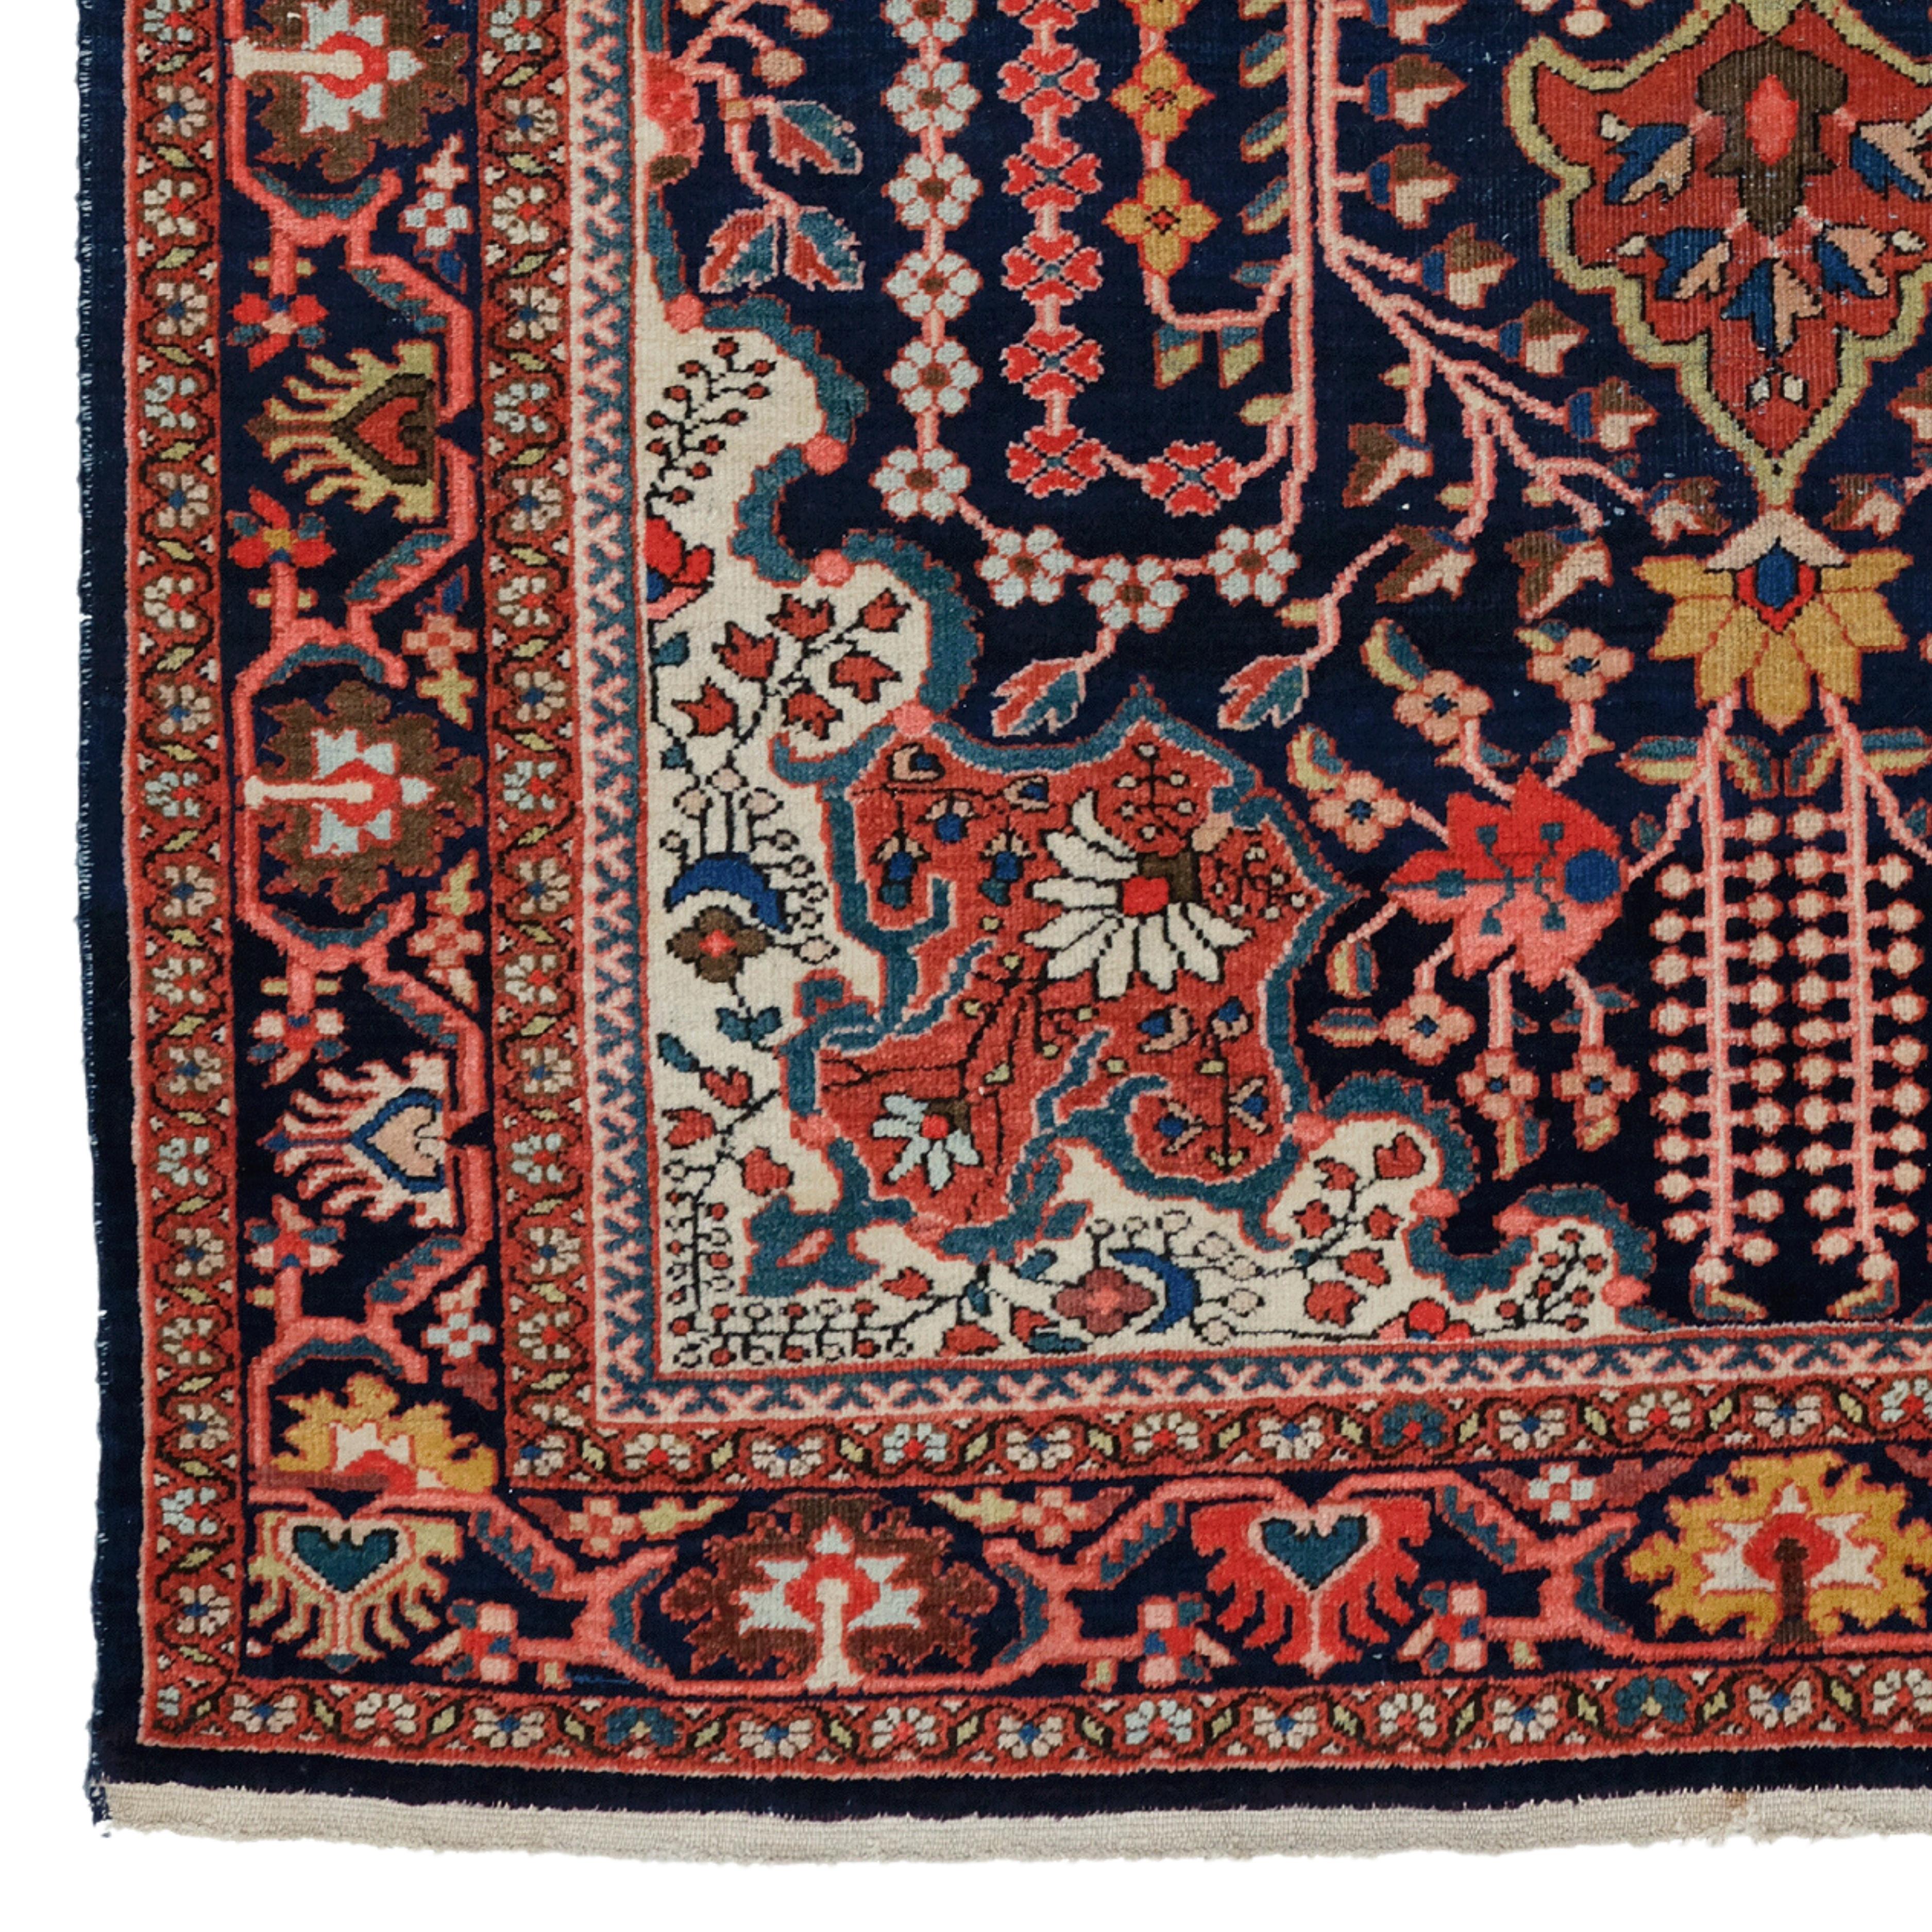 19th Century Sarouk Rug

This extraordinary carpet will fascinate you with its intricate designs and vibrant colors that reflect the rich history and craftsmanship of the period. Each stitch tells the story of skilled craftsmen who masterfully